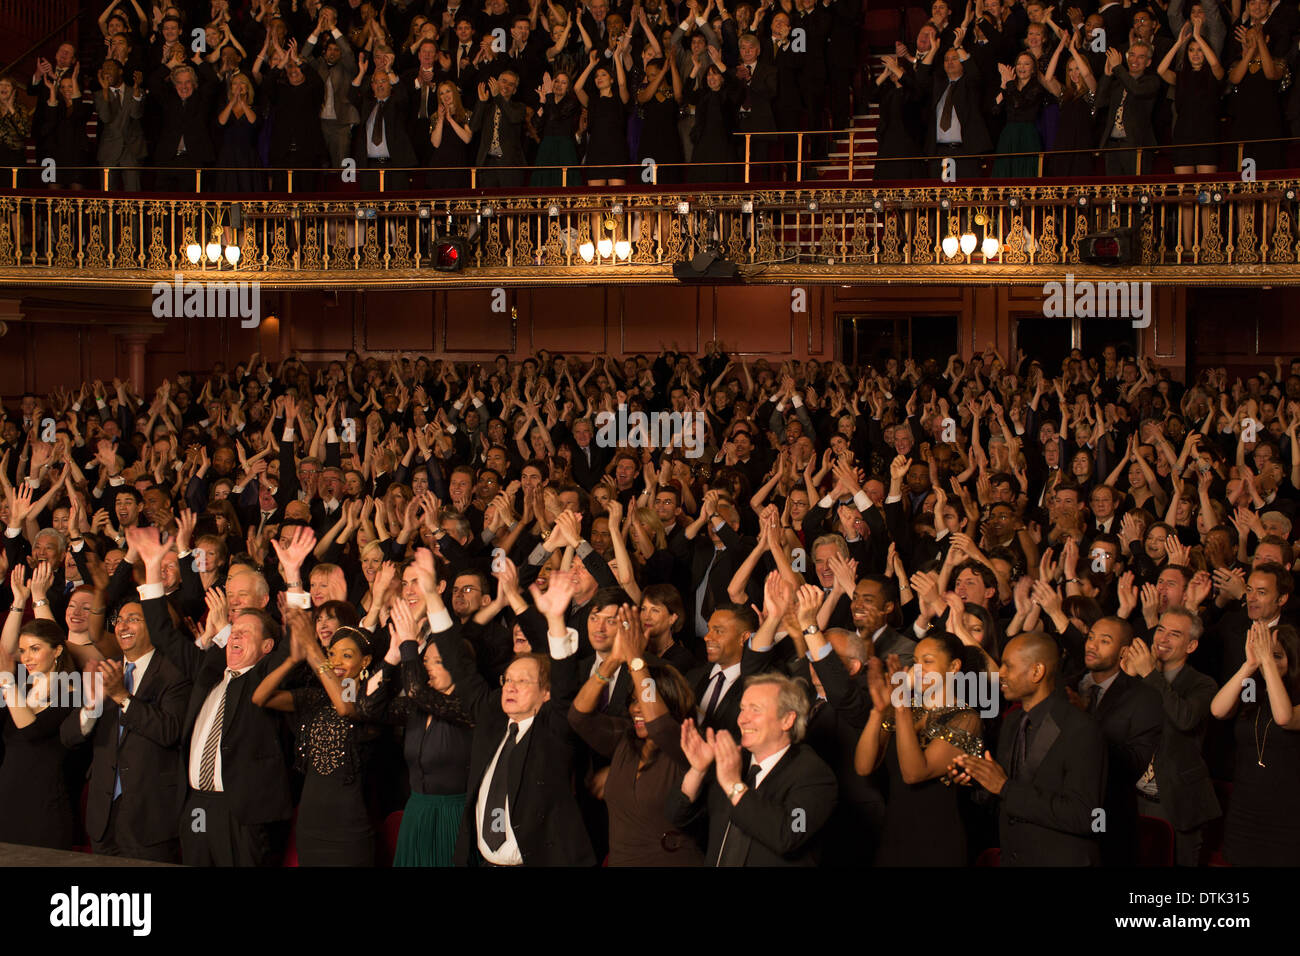 Audience cheering in theatre Banque D'Images